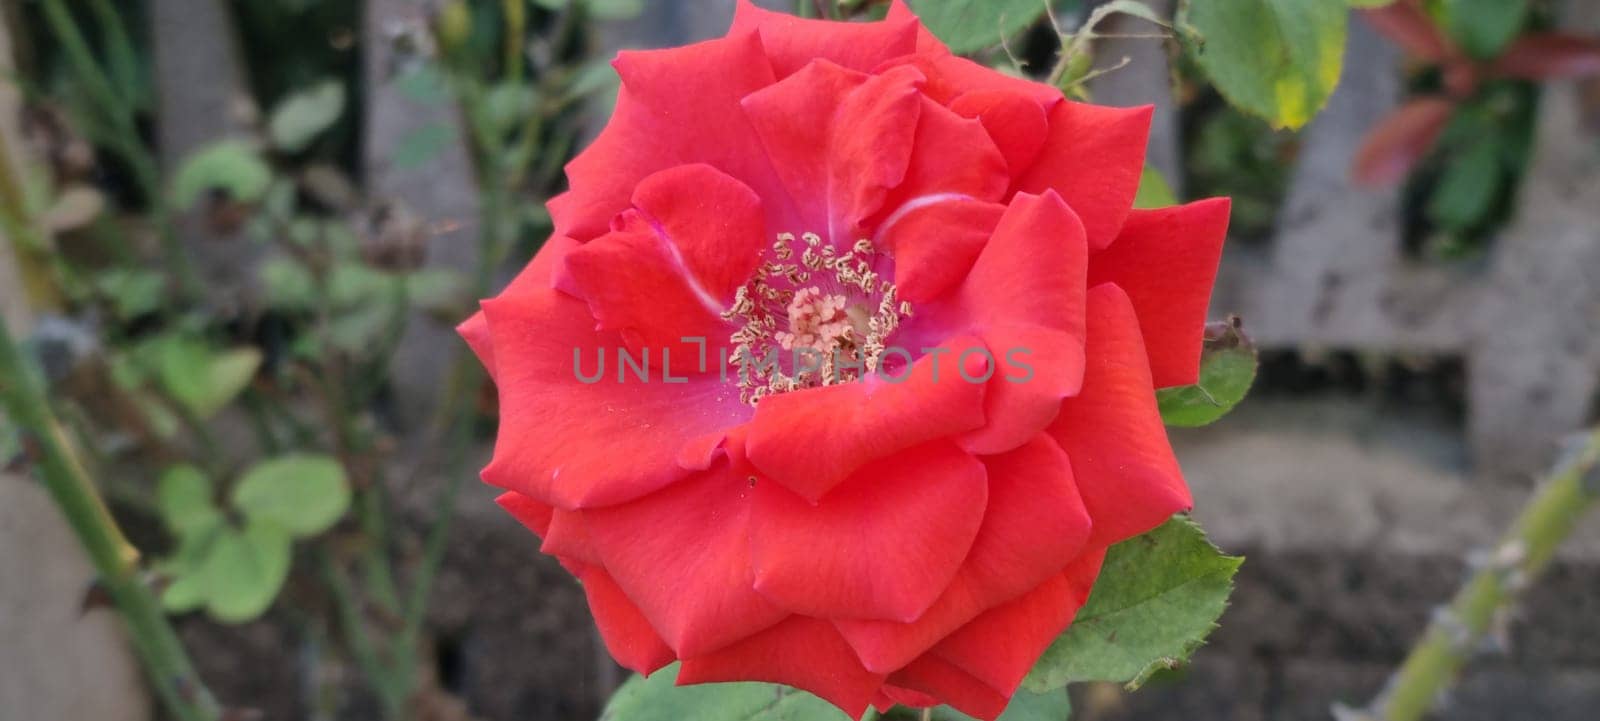 Vibrant red rose in bloom by FlightVideo